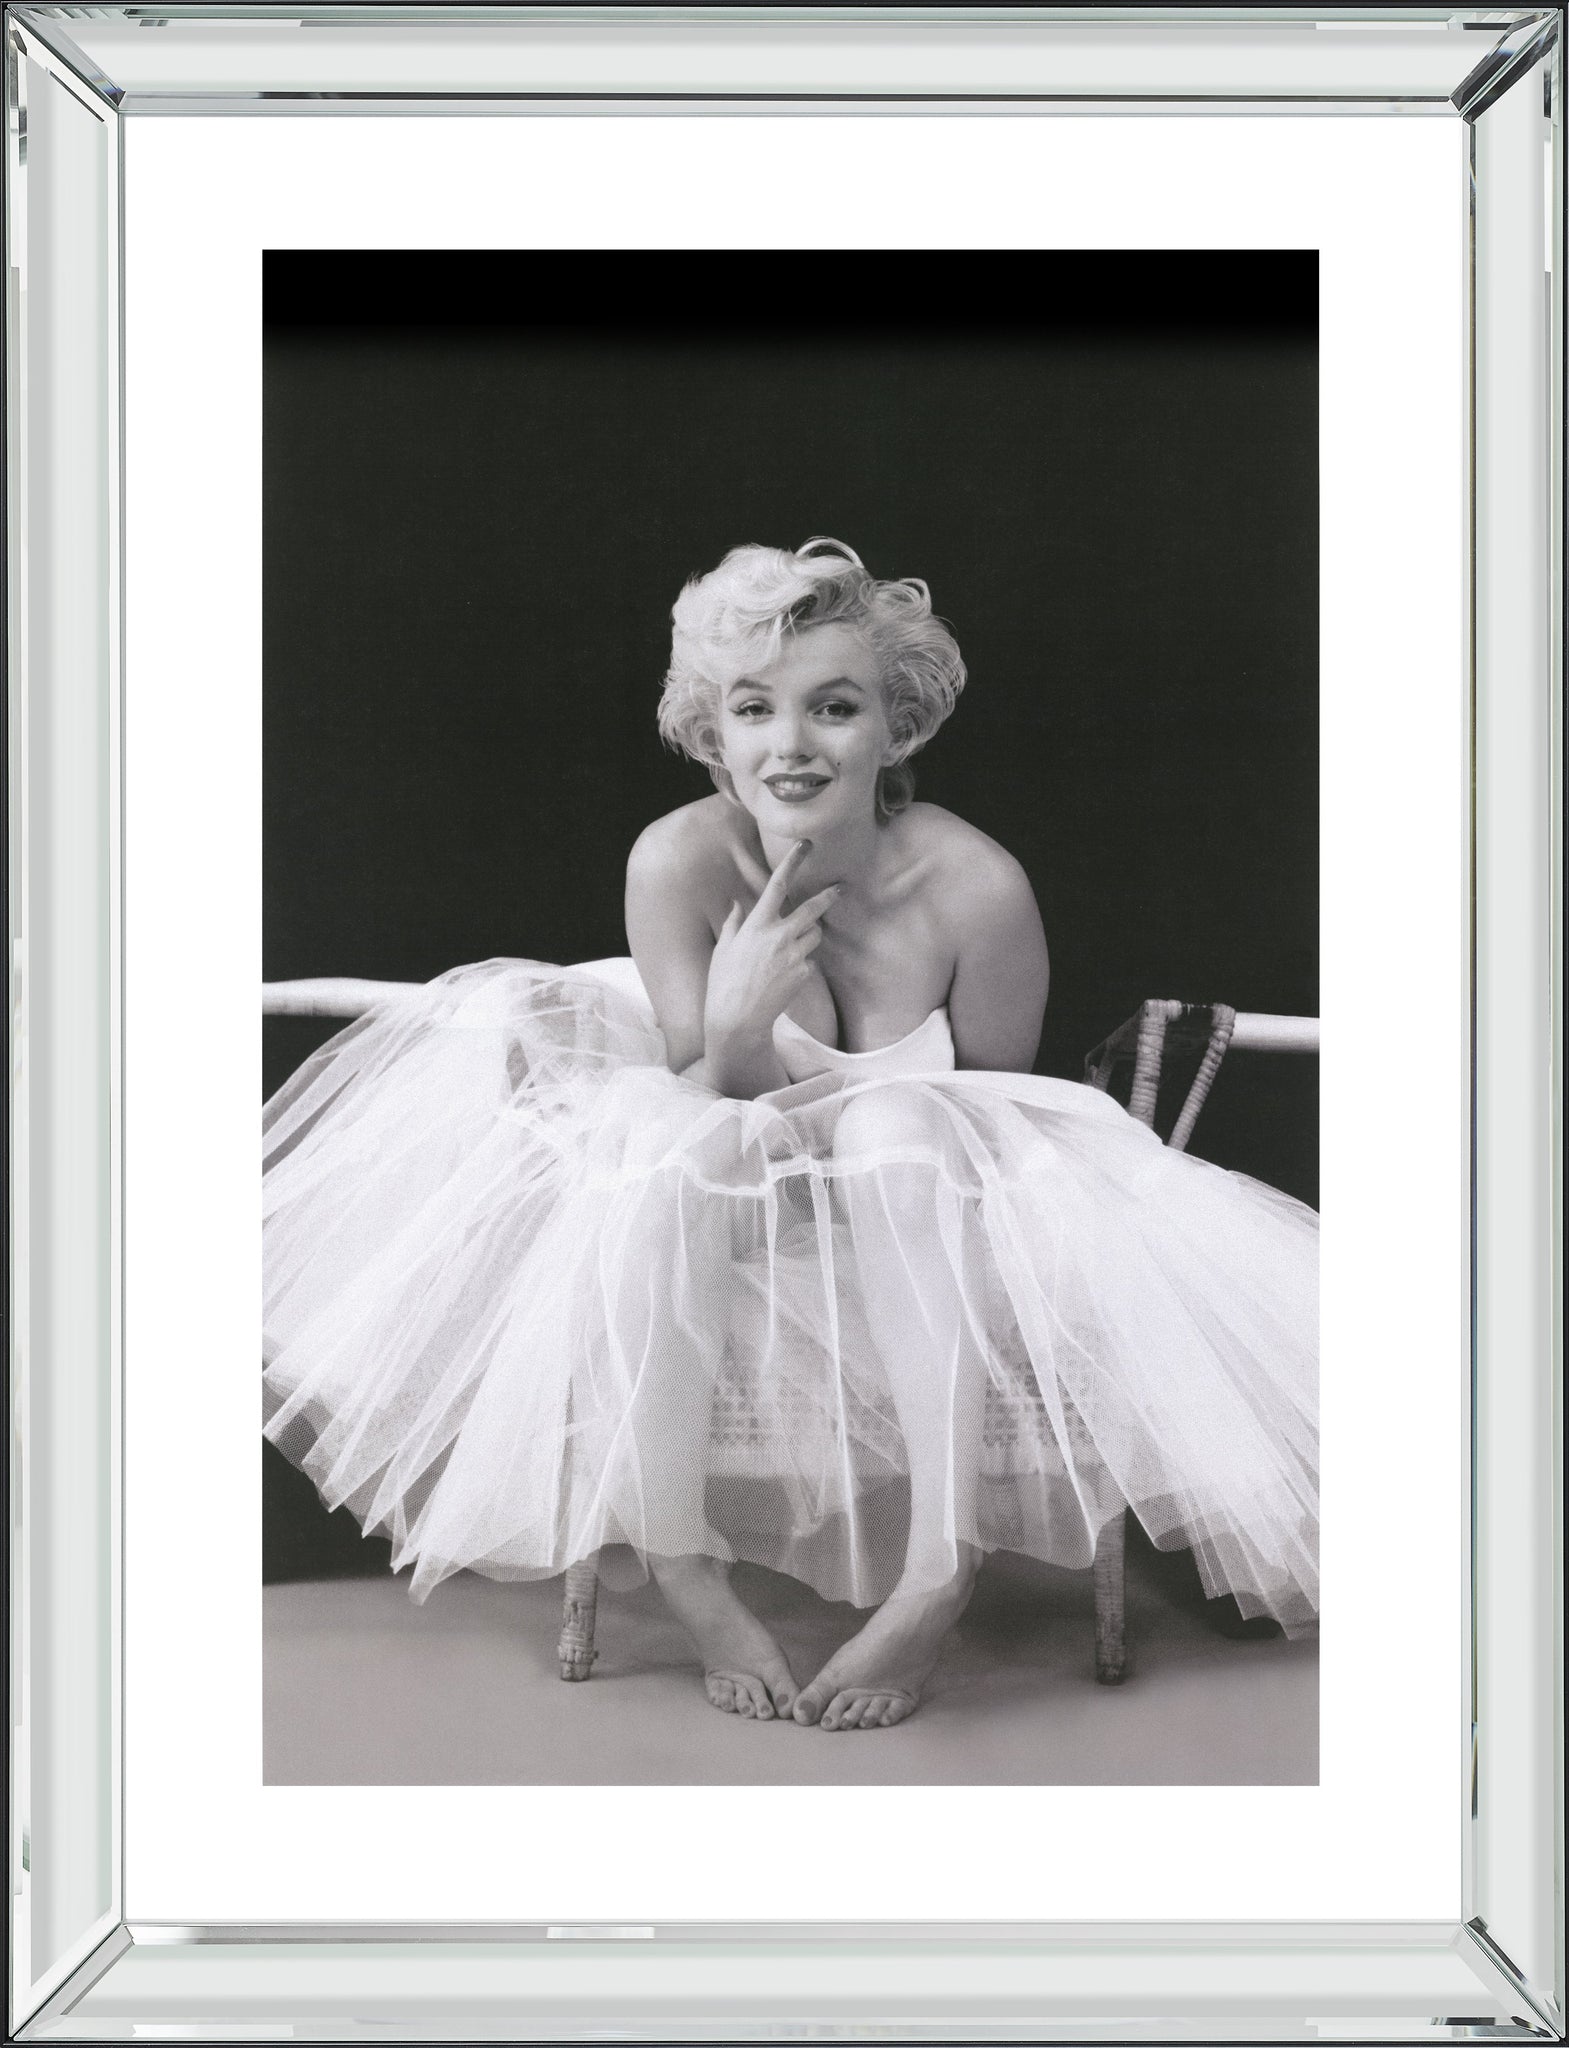 Marilyn Monroe Seated Mirror Frame Picture